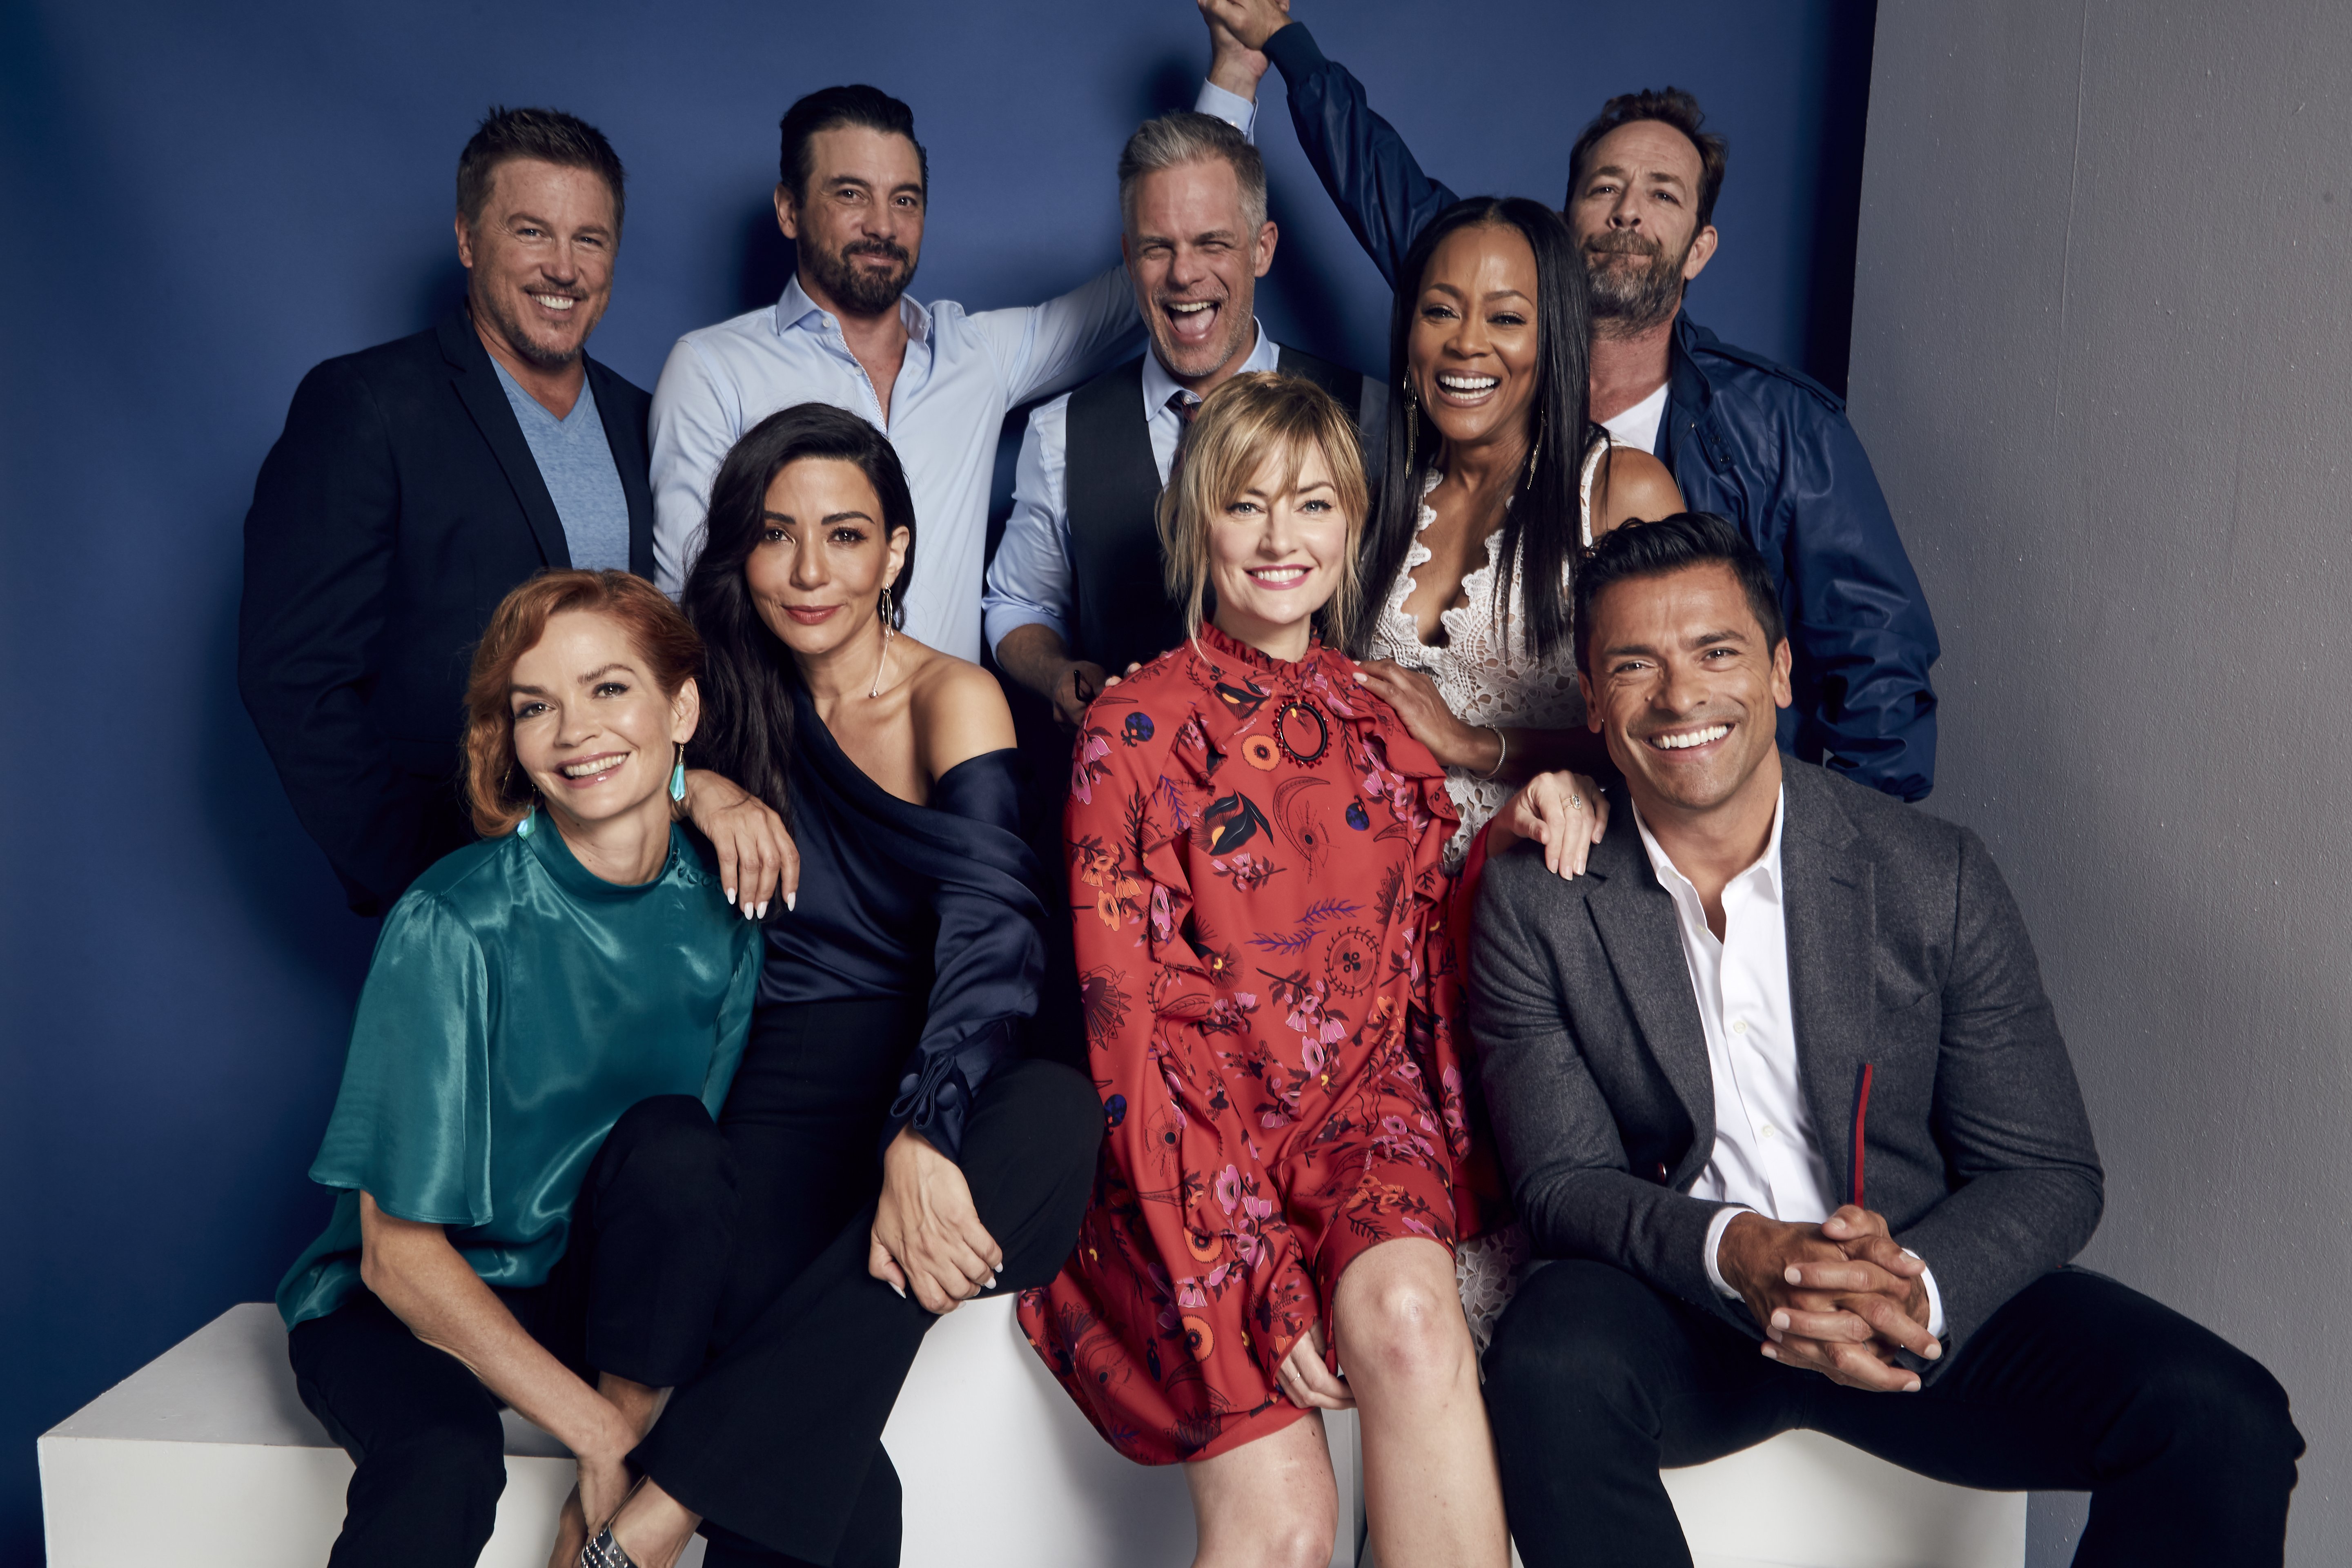 The cast of "Riverdale" at the 2018 Summer Television Critics Association Press Tour | Photo: Getty Images